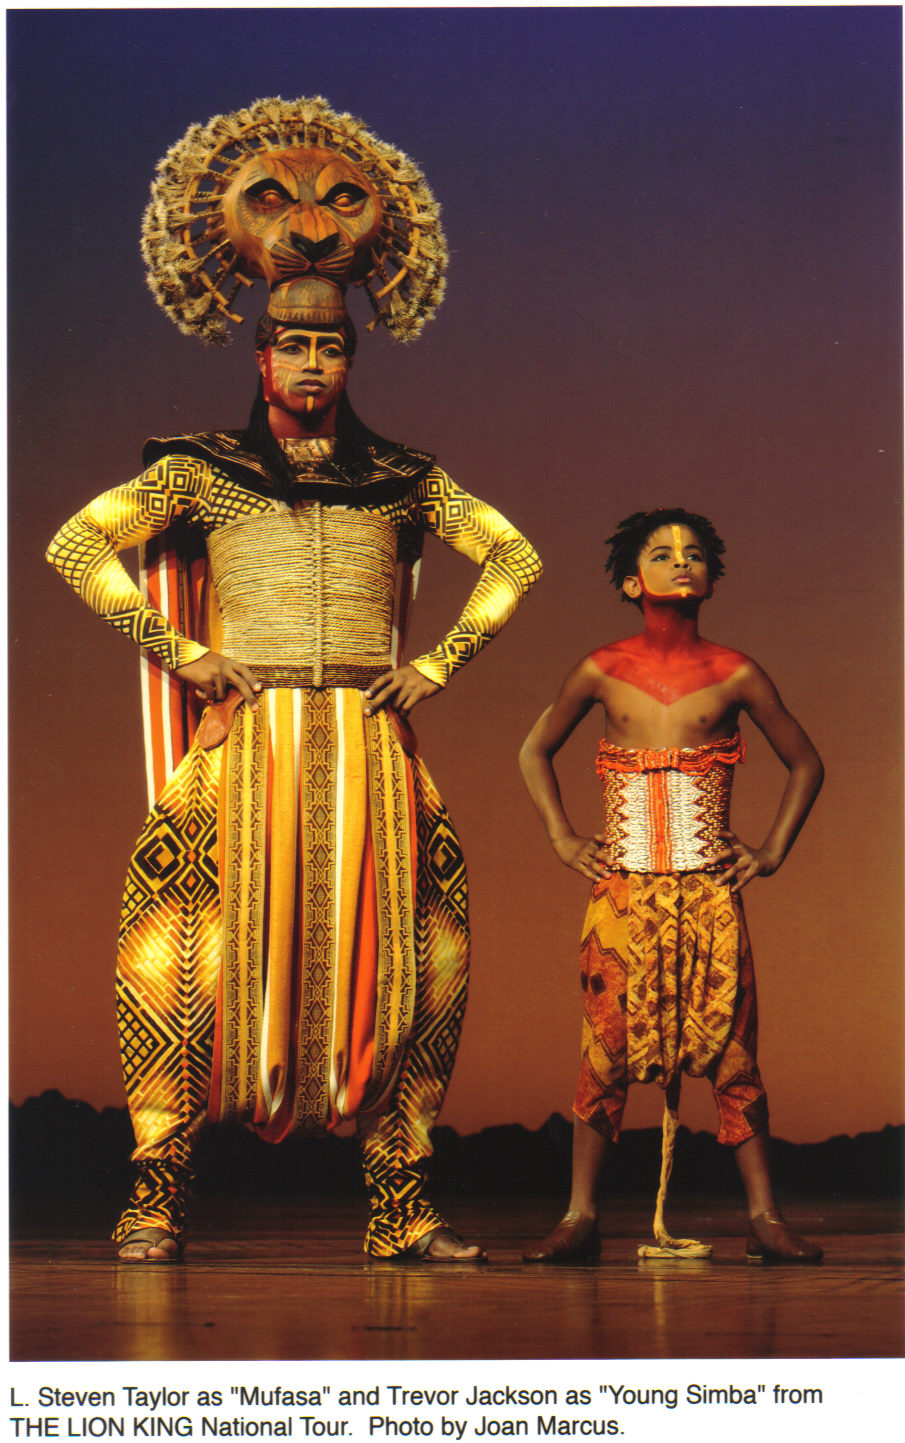 Trevor as Young Simba and L.Steven Taylor as Mufasa in The Lion King